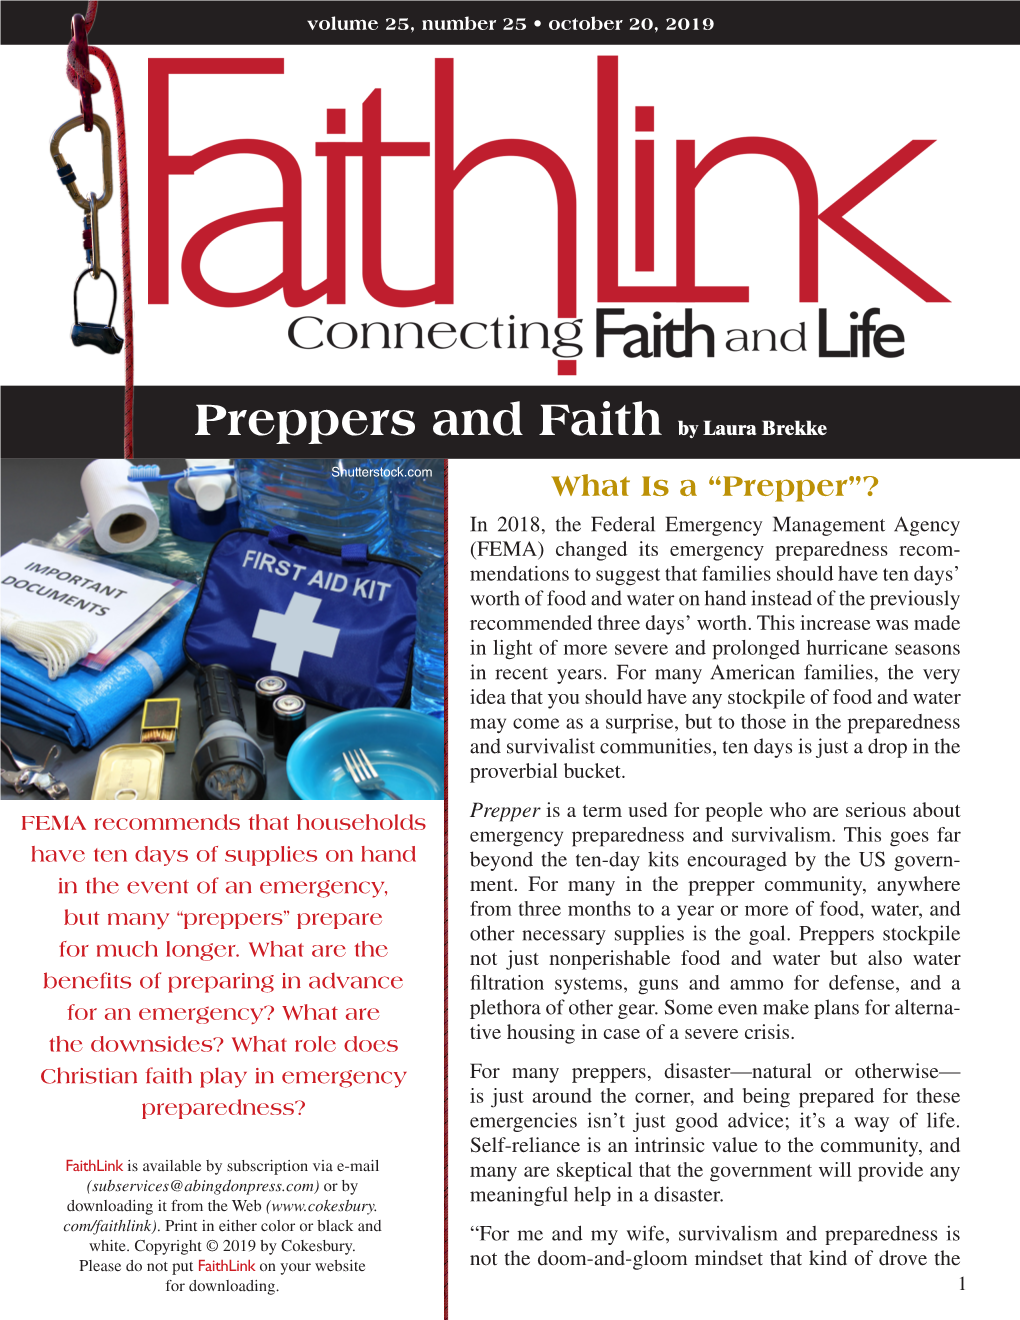 Preppers and Faith by Laura Brekke